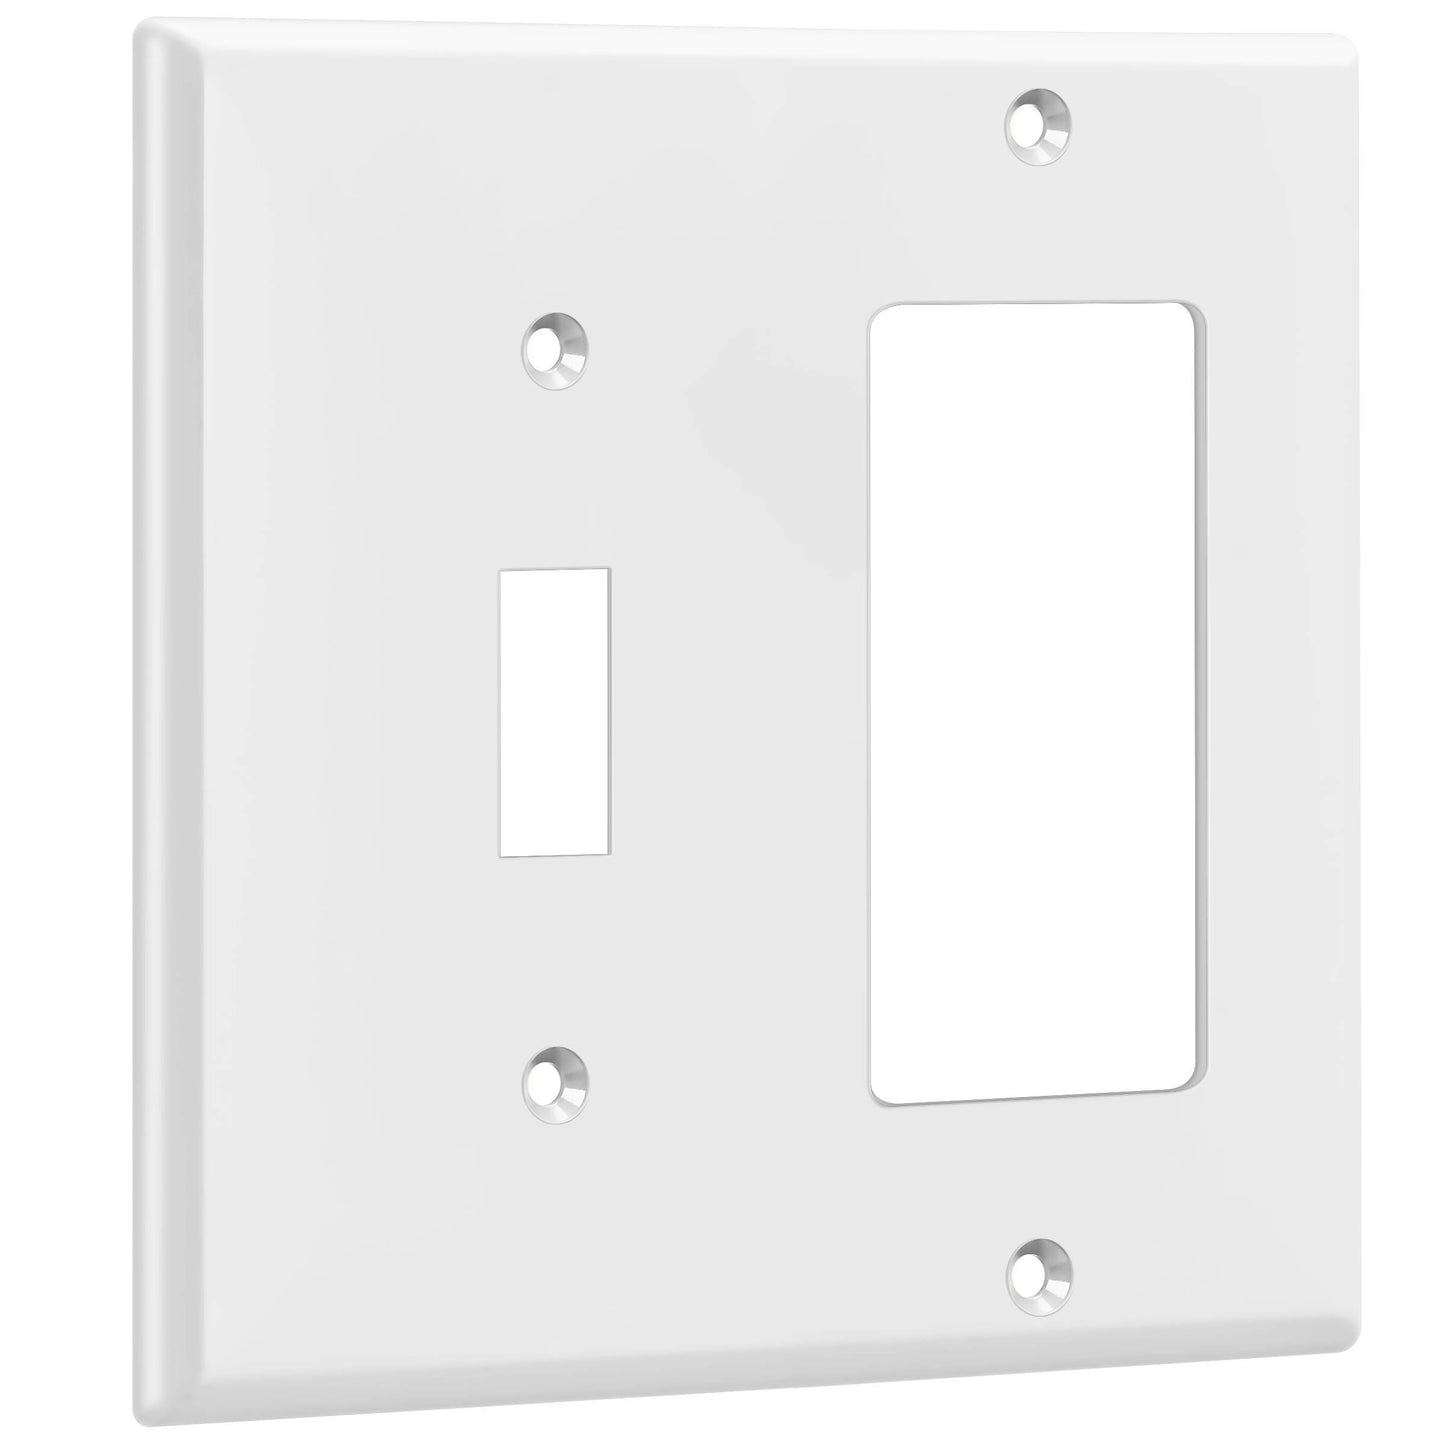 ENERLITES Combination Toggle Switch & Decorator Receptacle Metal Wall Plate, Stainless Steel Outlet Cover, Corrosion-Resistant, Standard Size 2-Gang 4.50" x 4.57", 771131-AC, Antique Copper